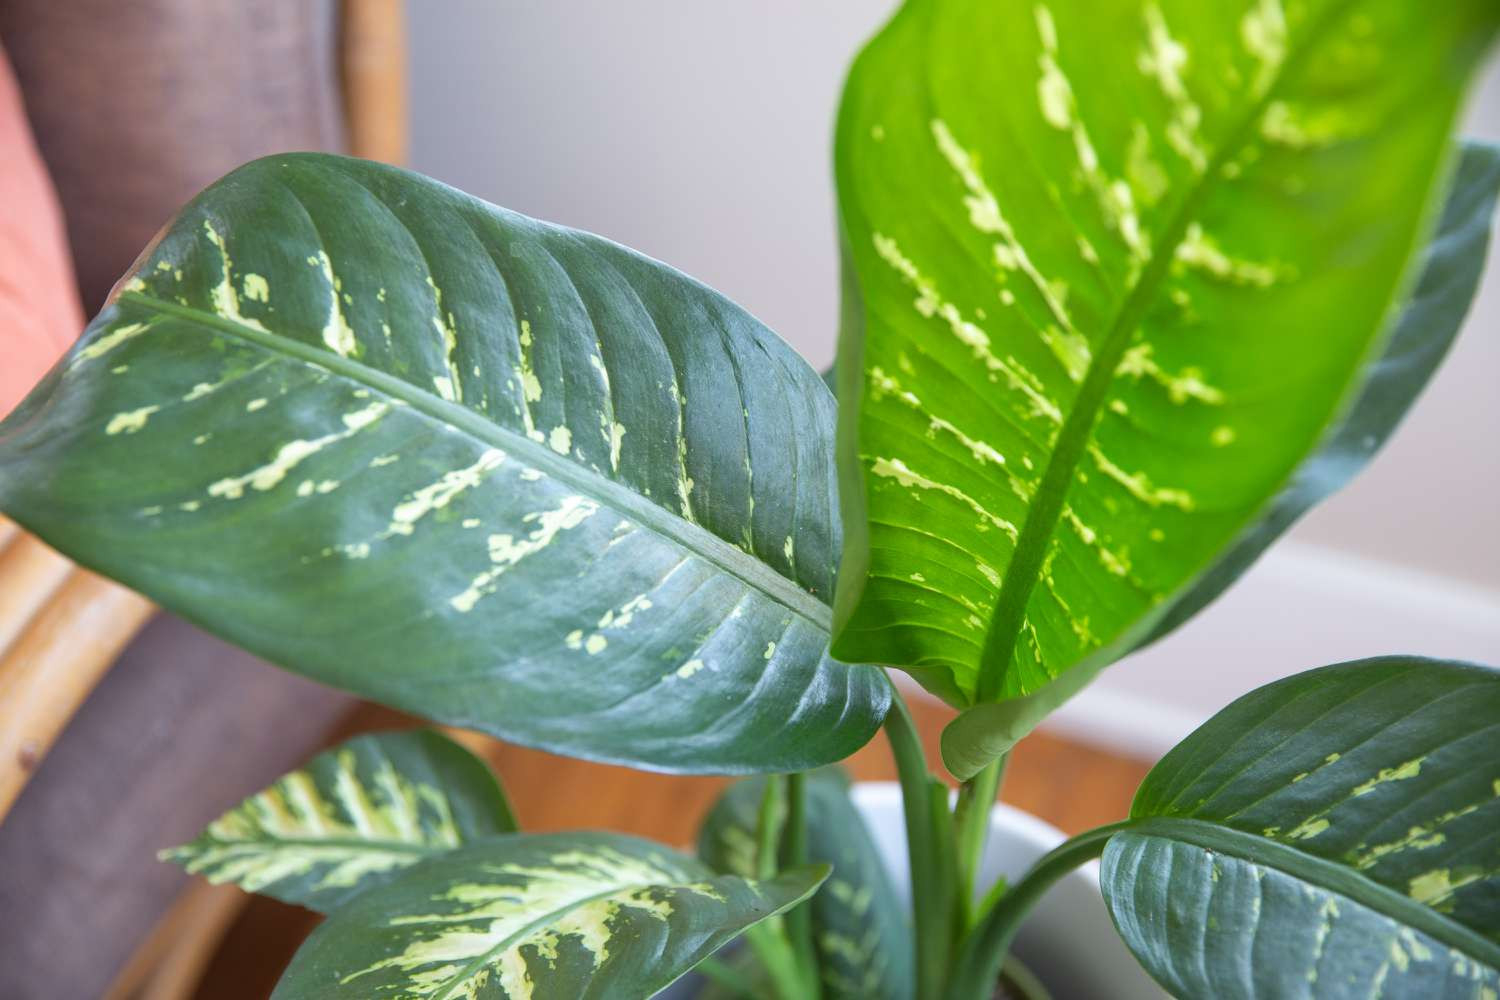 How To Grow And Care For Dieffenbachia (Dumb Cane)